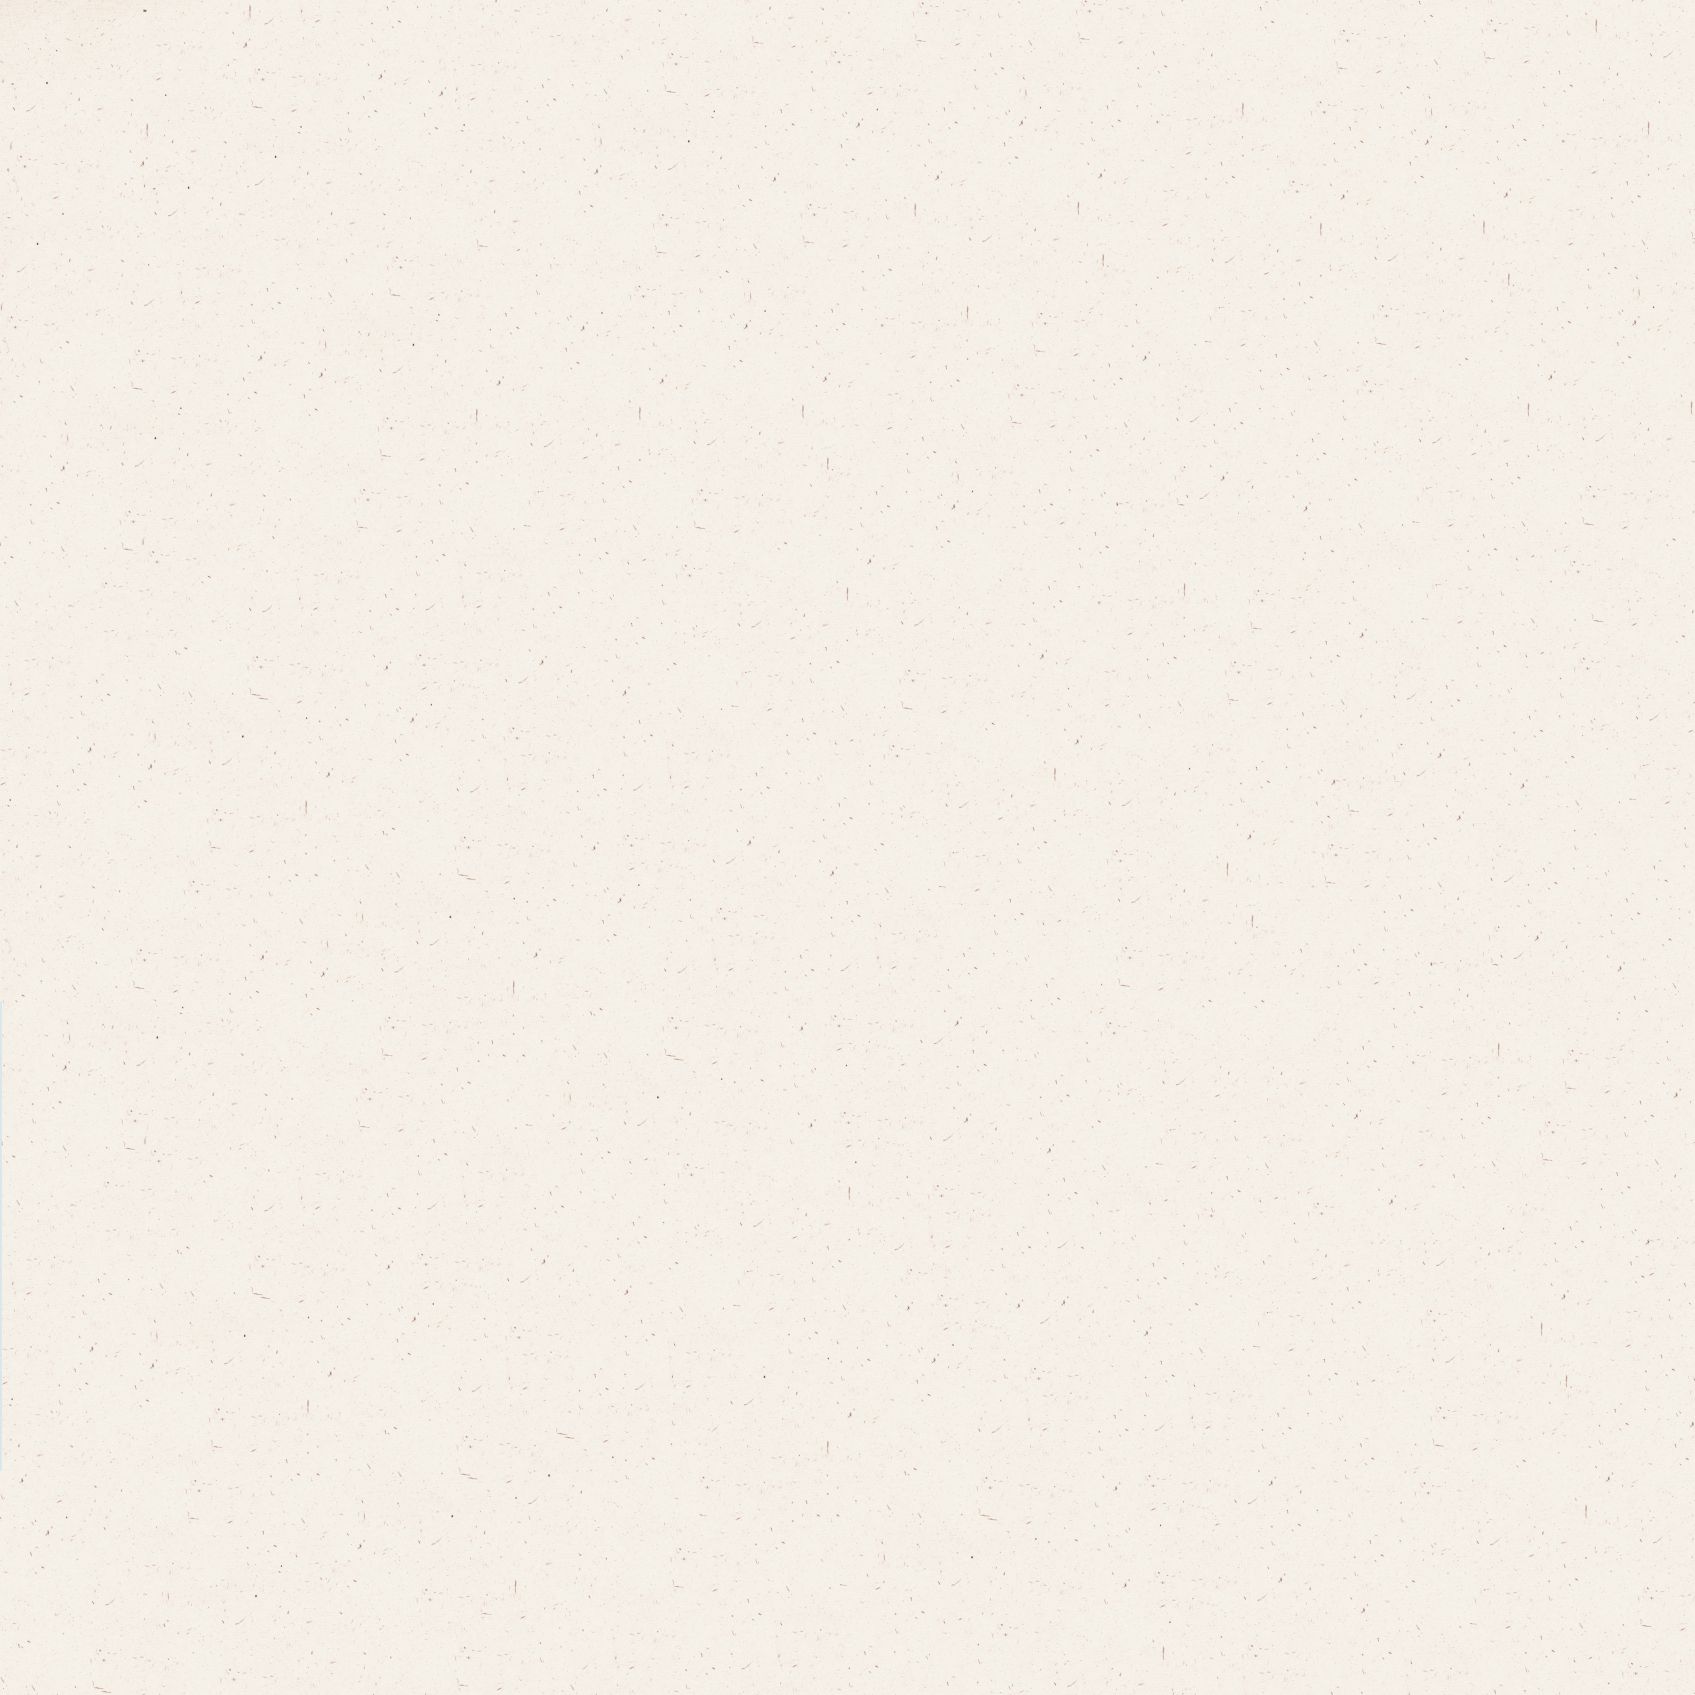 Rustic Ivory White Cardstock - 8.5 x 11 inch - 80Lb Cover - 50 Sheets -  Clear Path Paper 